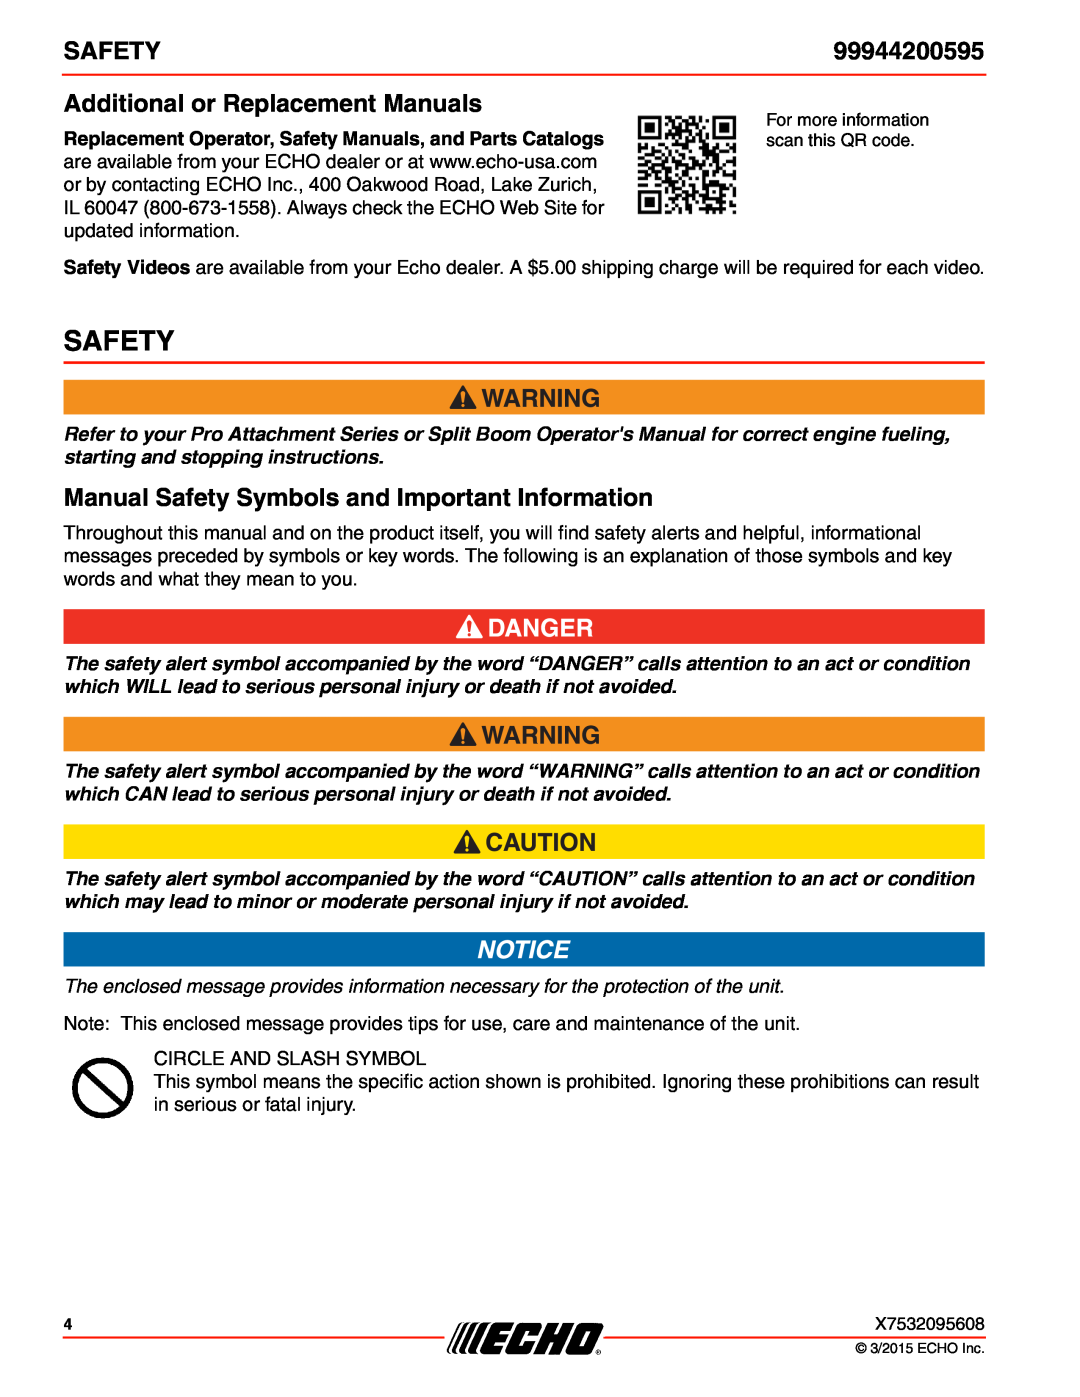 Echo 2400, 260, 261, 231 99944200595, Additional or Replacement Manuals, Manual Safety Symbols and Important Information 